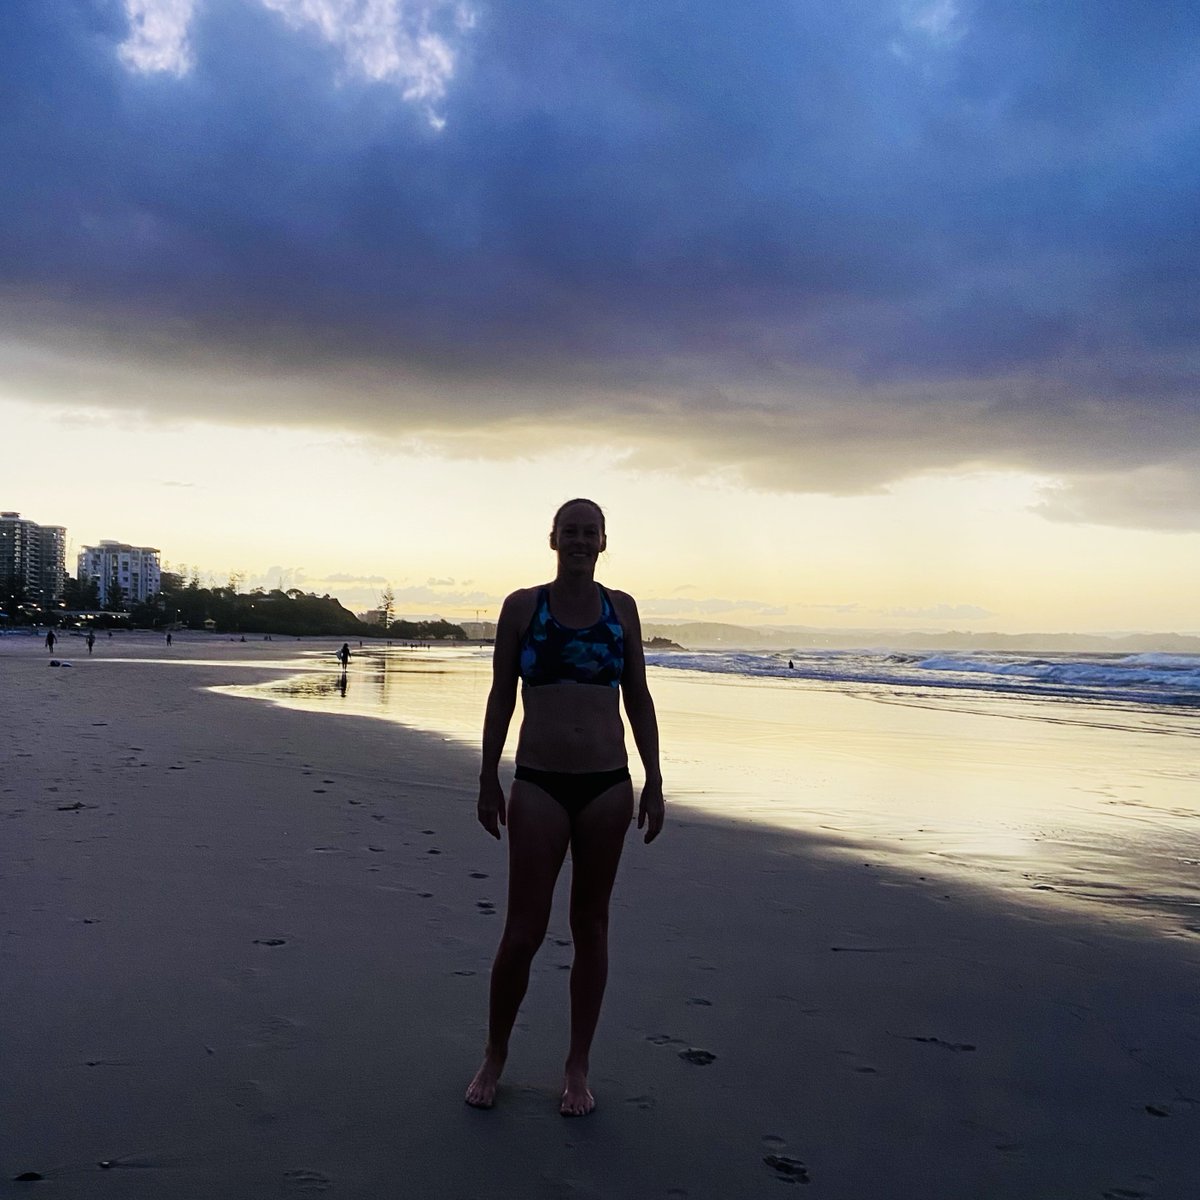 Thanks to everyone who has asked about my book 3. It isn't going well. It needs big changes and I'm totally STUCK! Hoping to find inspiration from long autumn beach walks and swims. #ILoveGoldCoast #GoldCoast #Beachlife